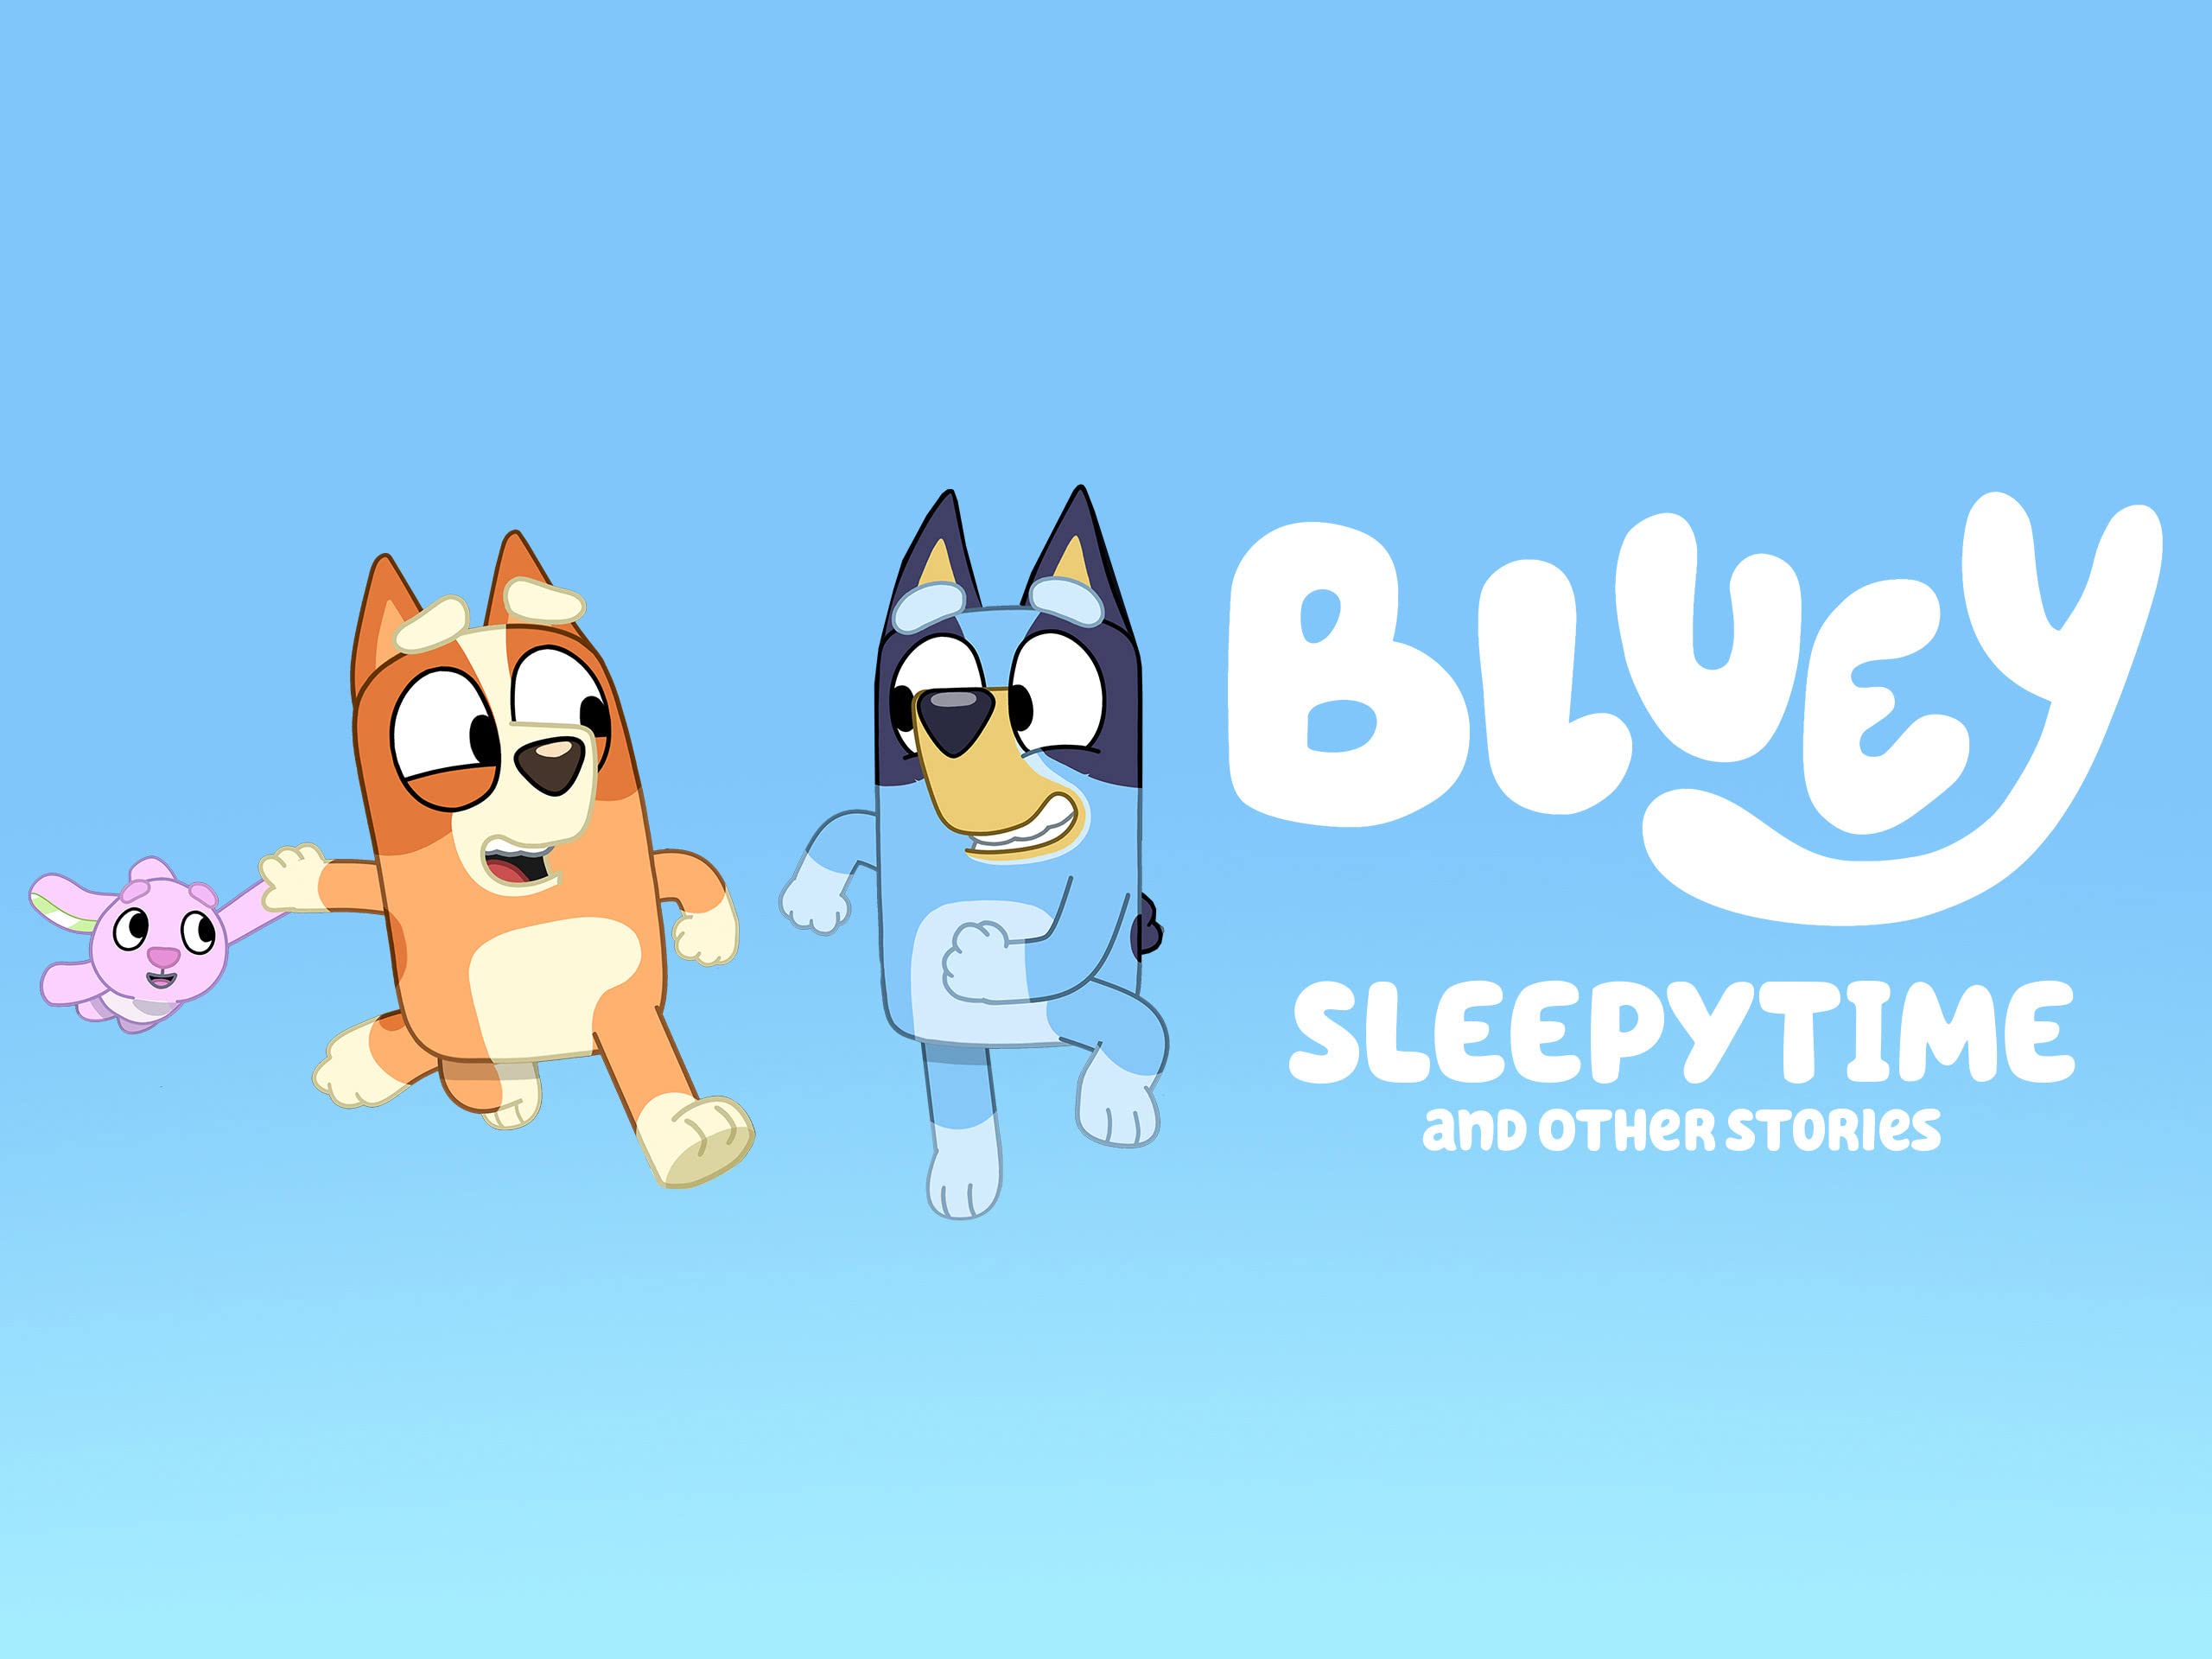 Bluey: The Videogame - Bluey Official Website